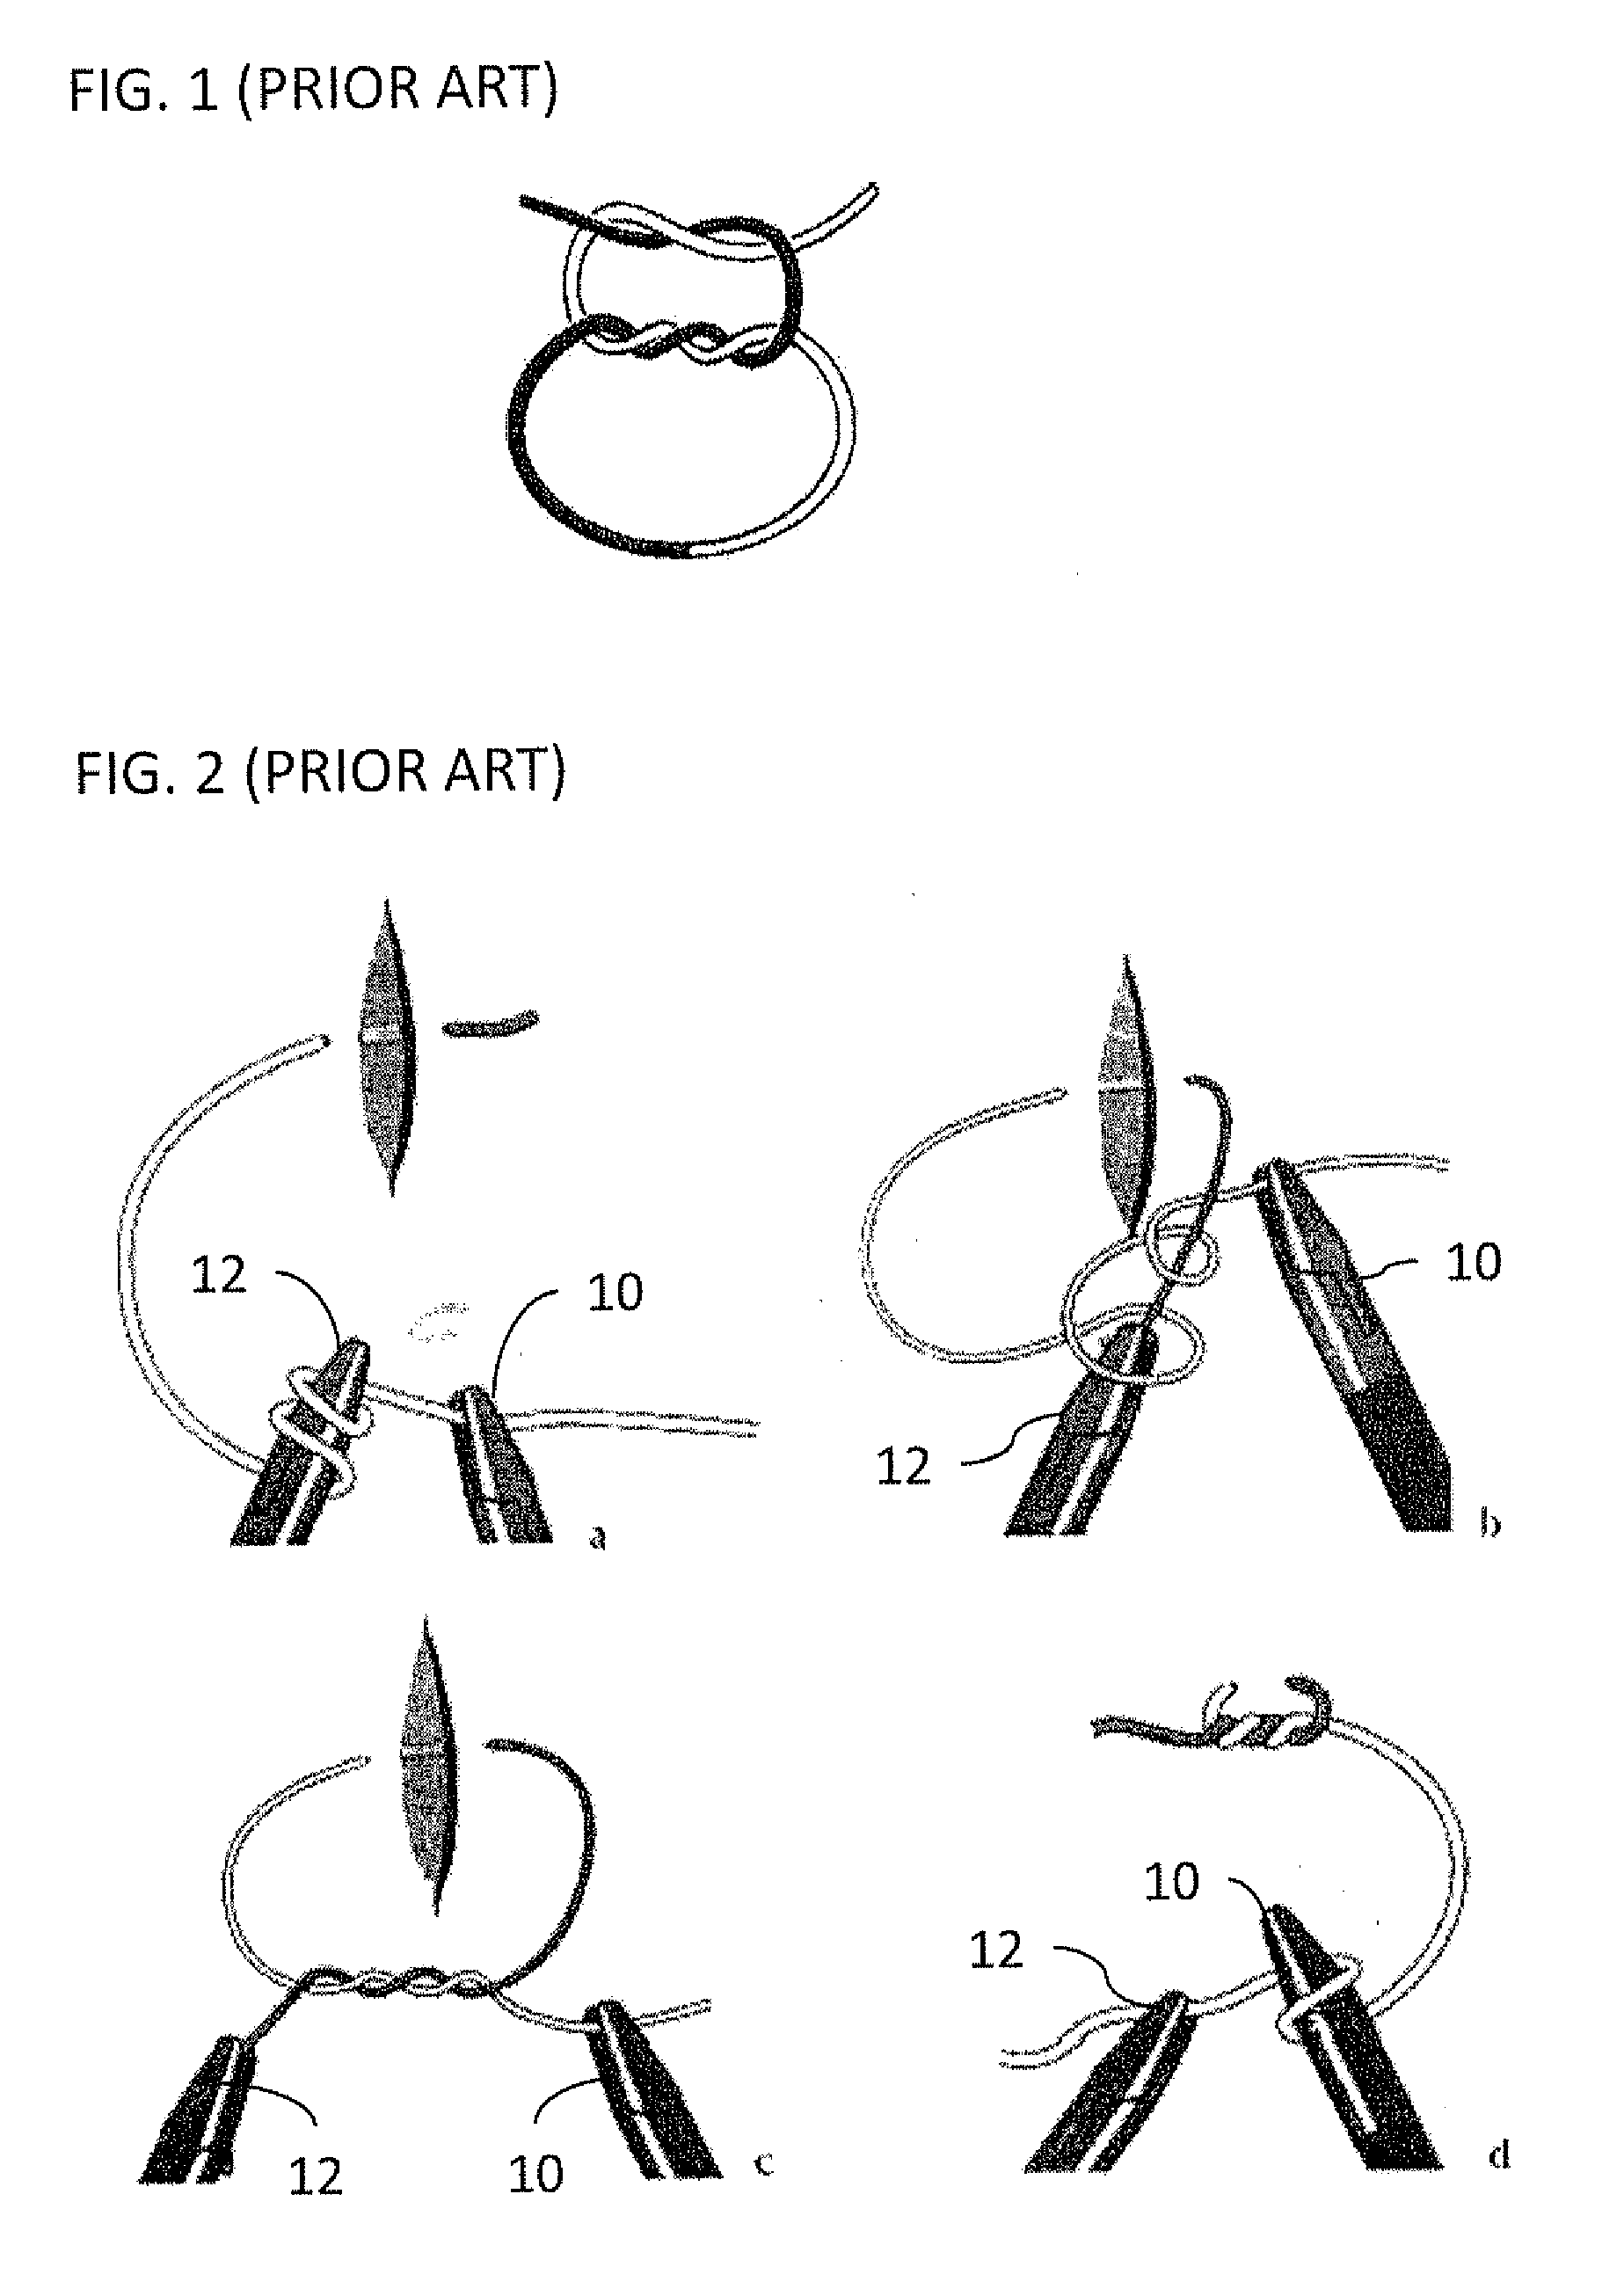 Suture and suturing technique for facilitating knotting